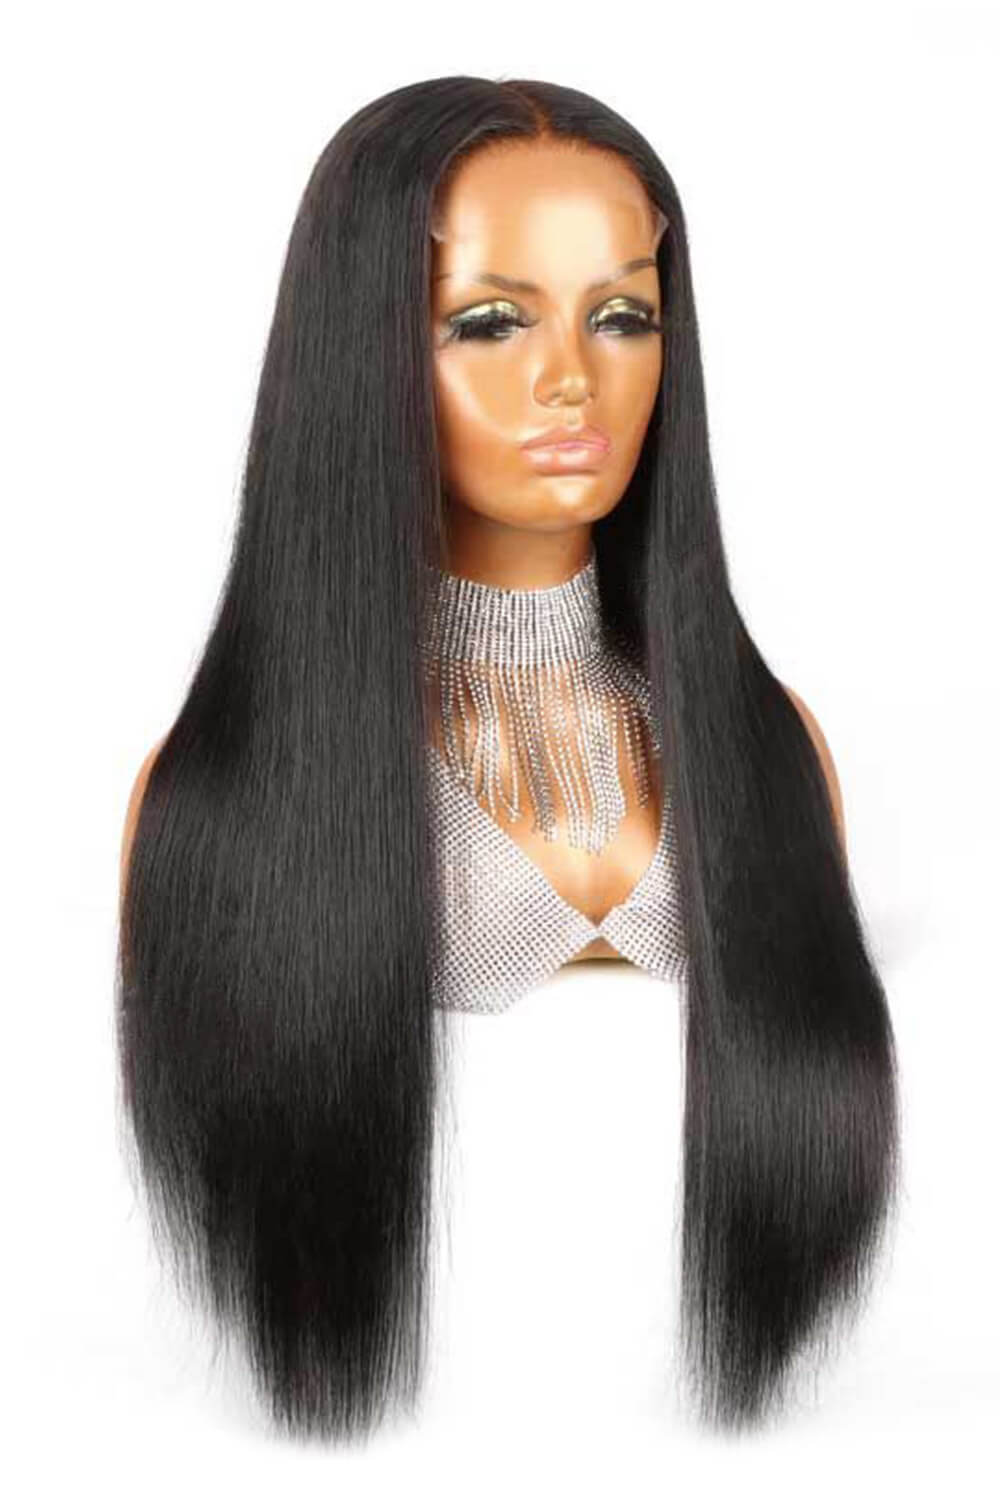 5x5-lace-closure-wig-straight-human-hair-black-middle-part-6